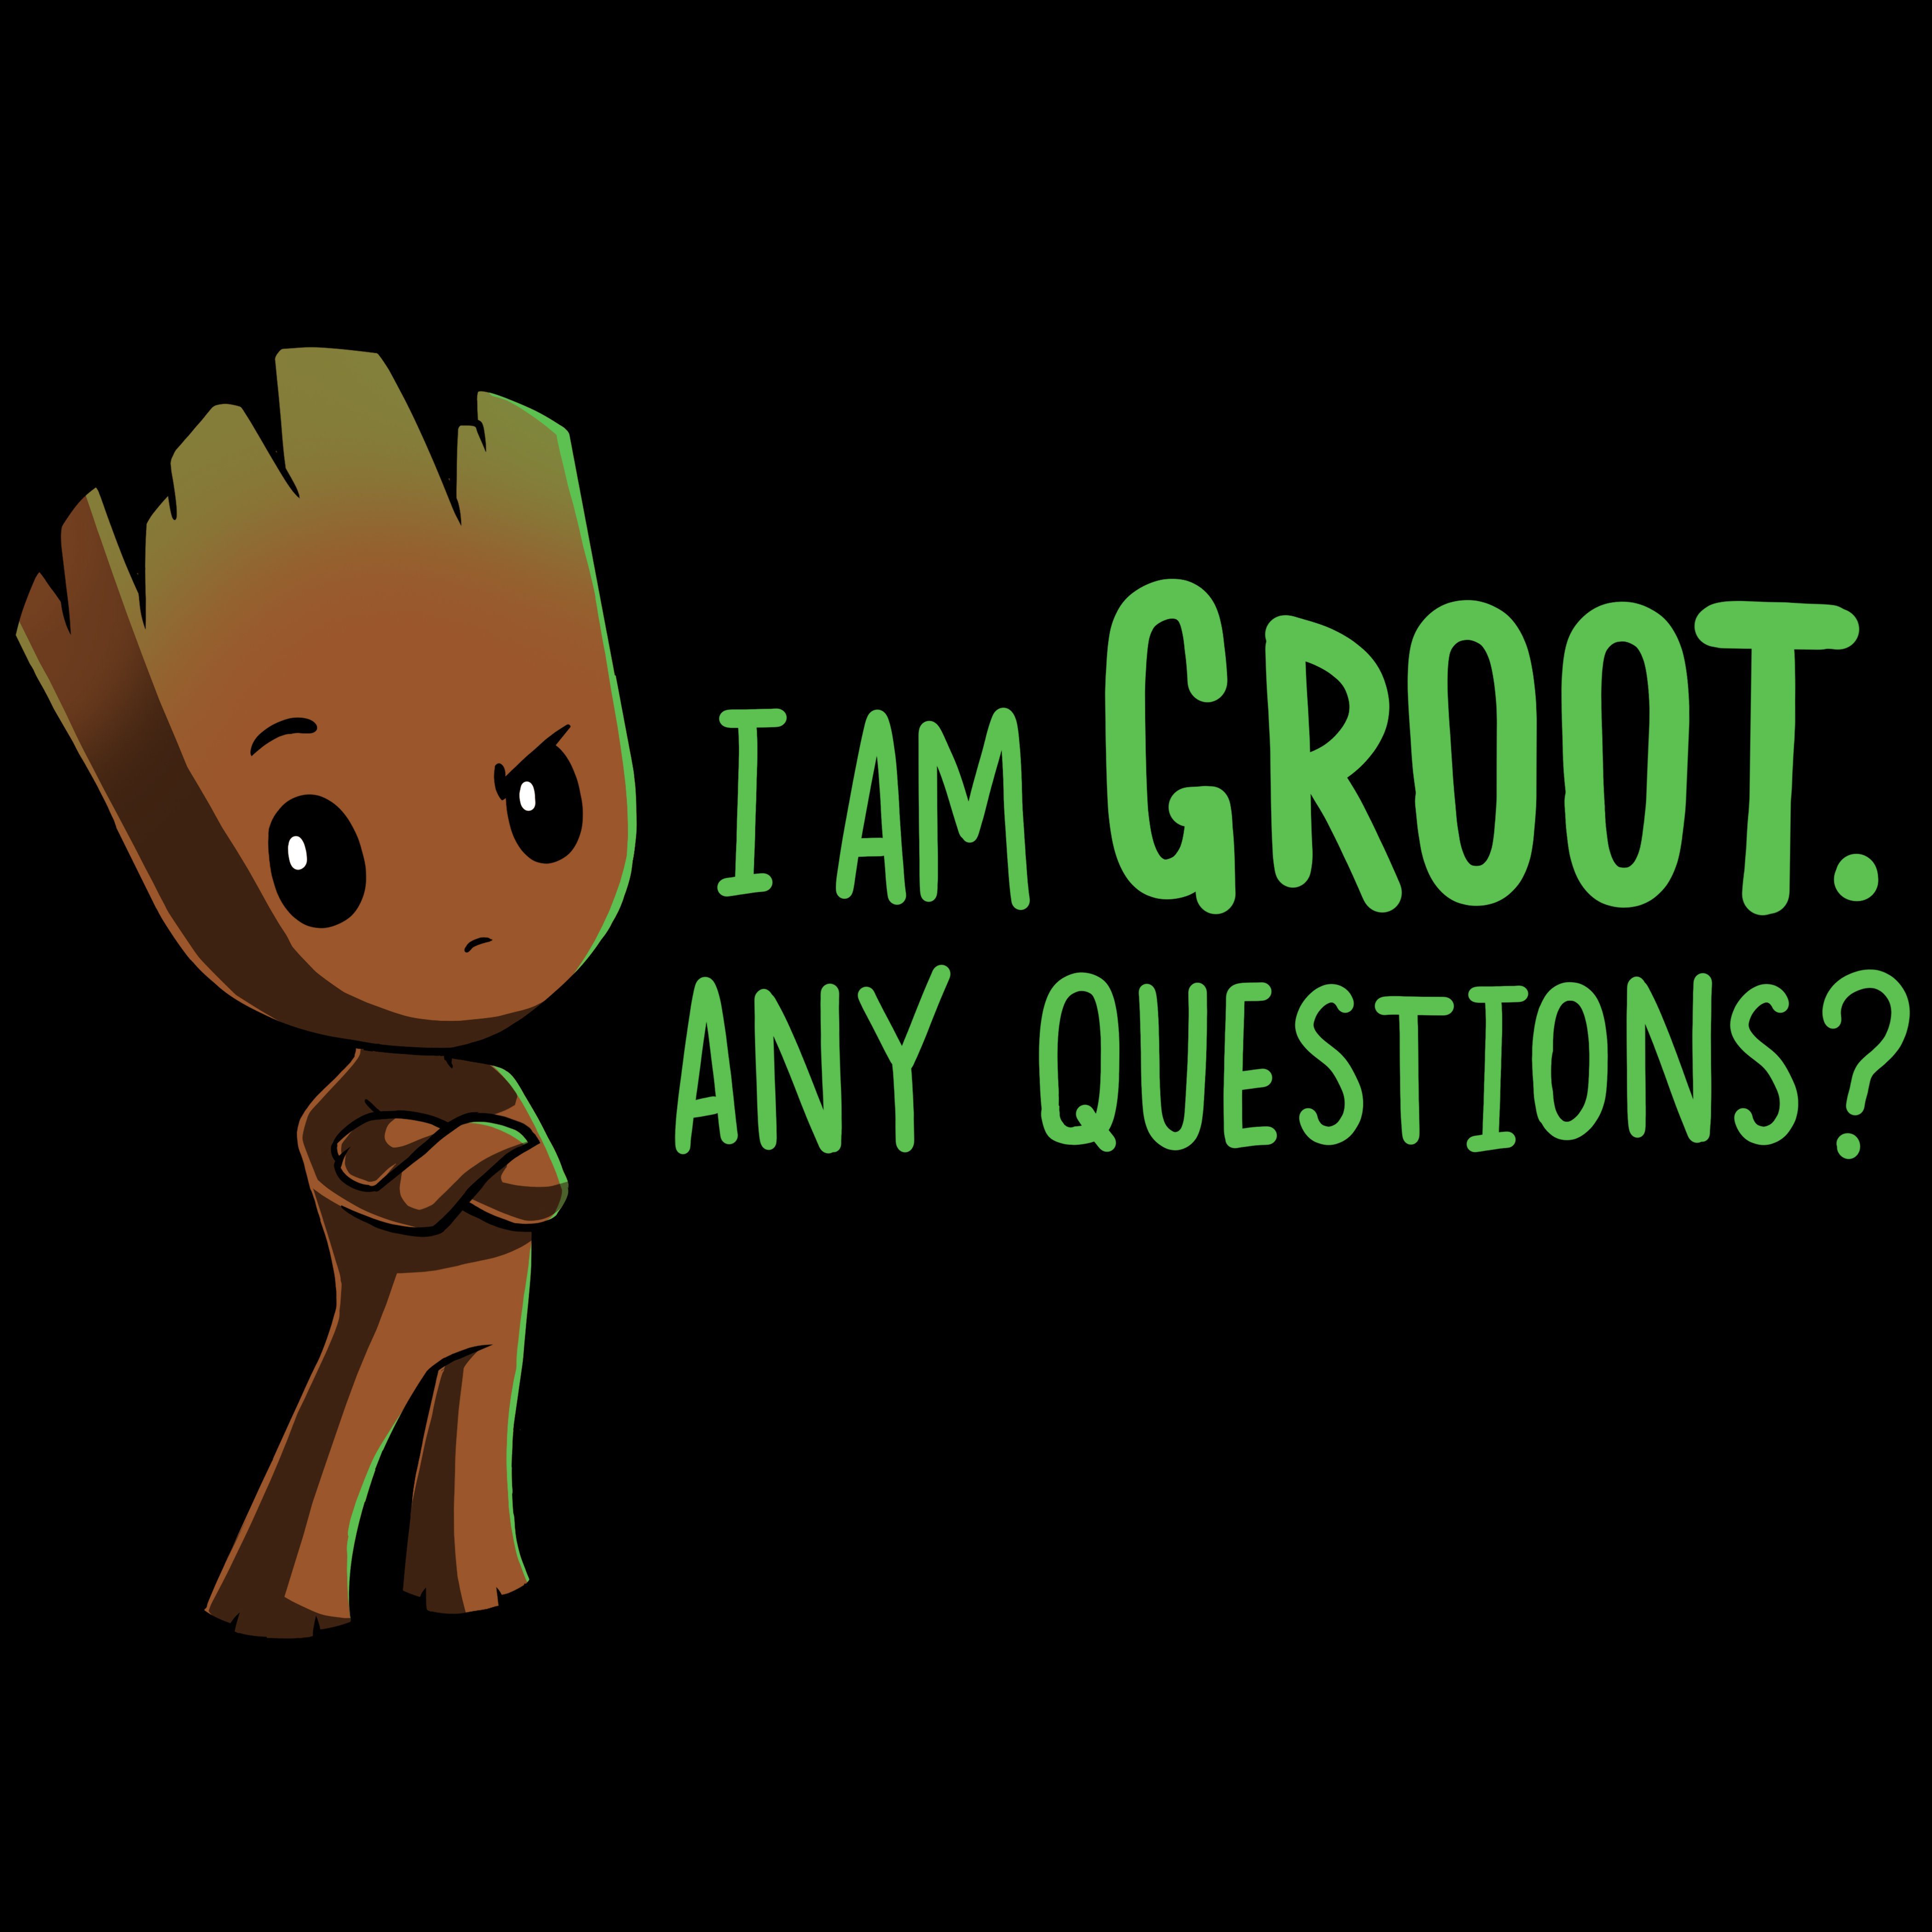 I Am Groot. Any Questions?